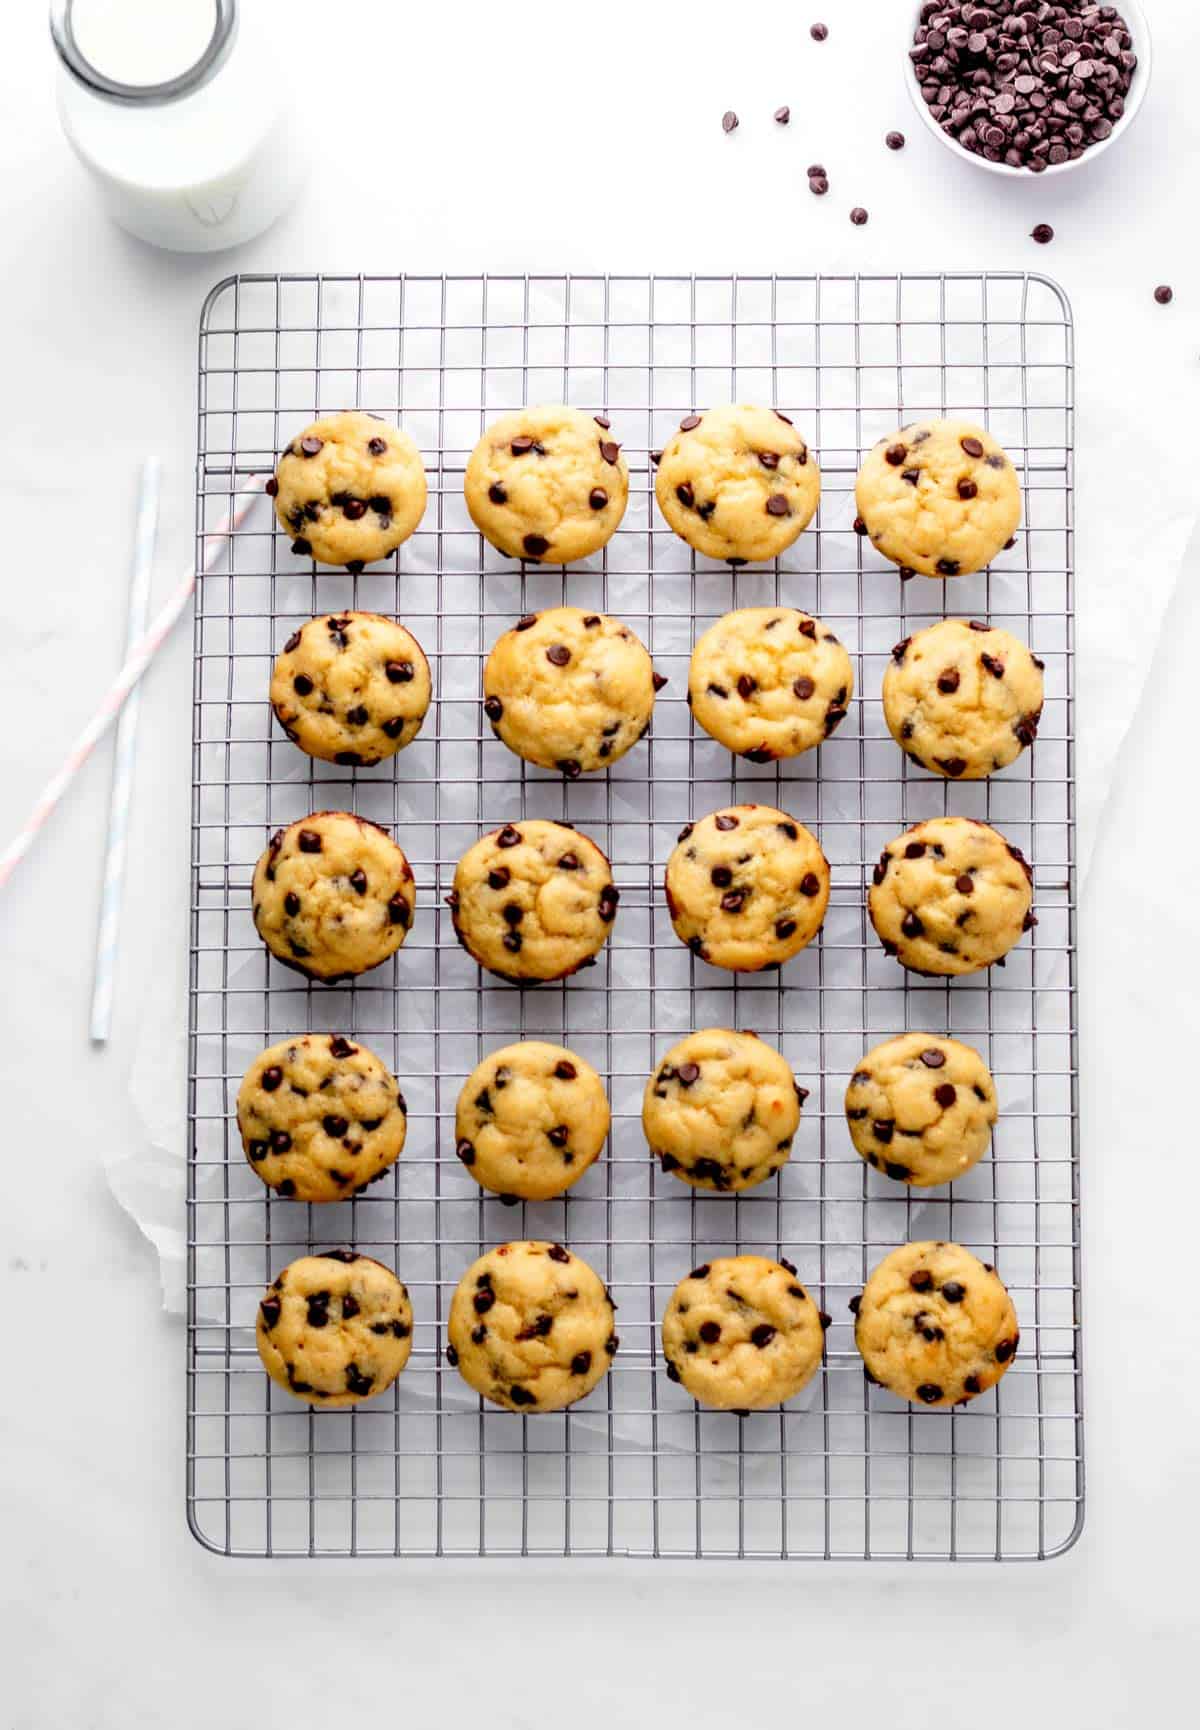 Mini chocolate chip muffins on a wire rack.